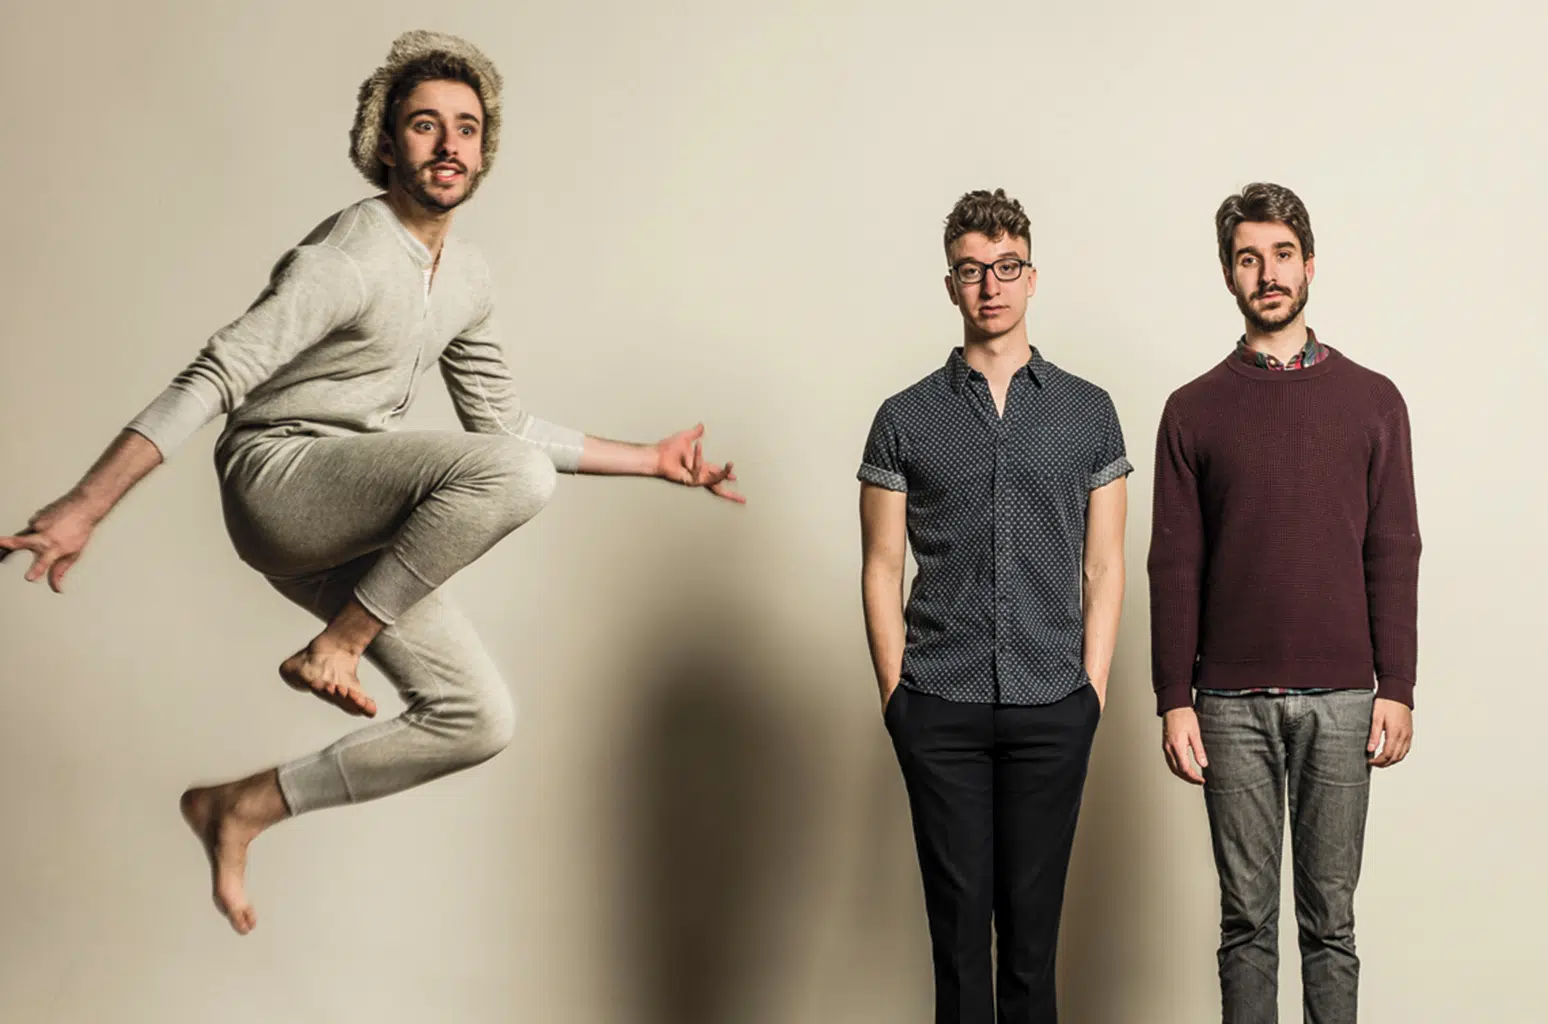 AJR featuring Rivers Cuomo, Cellphones during Sex, Phone Creeping